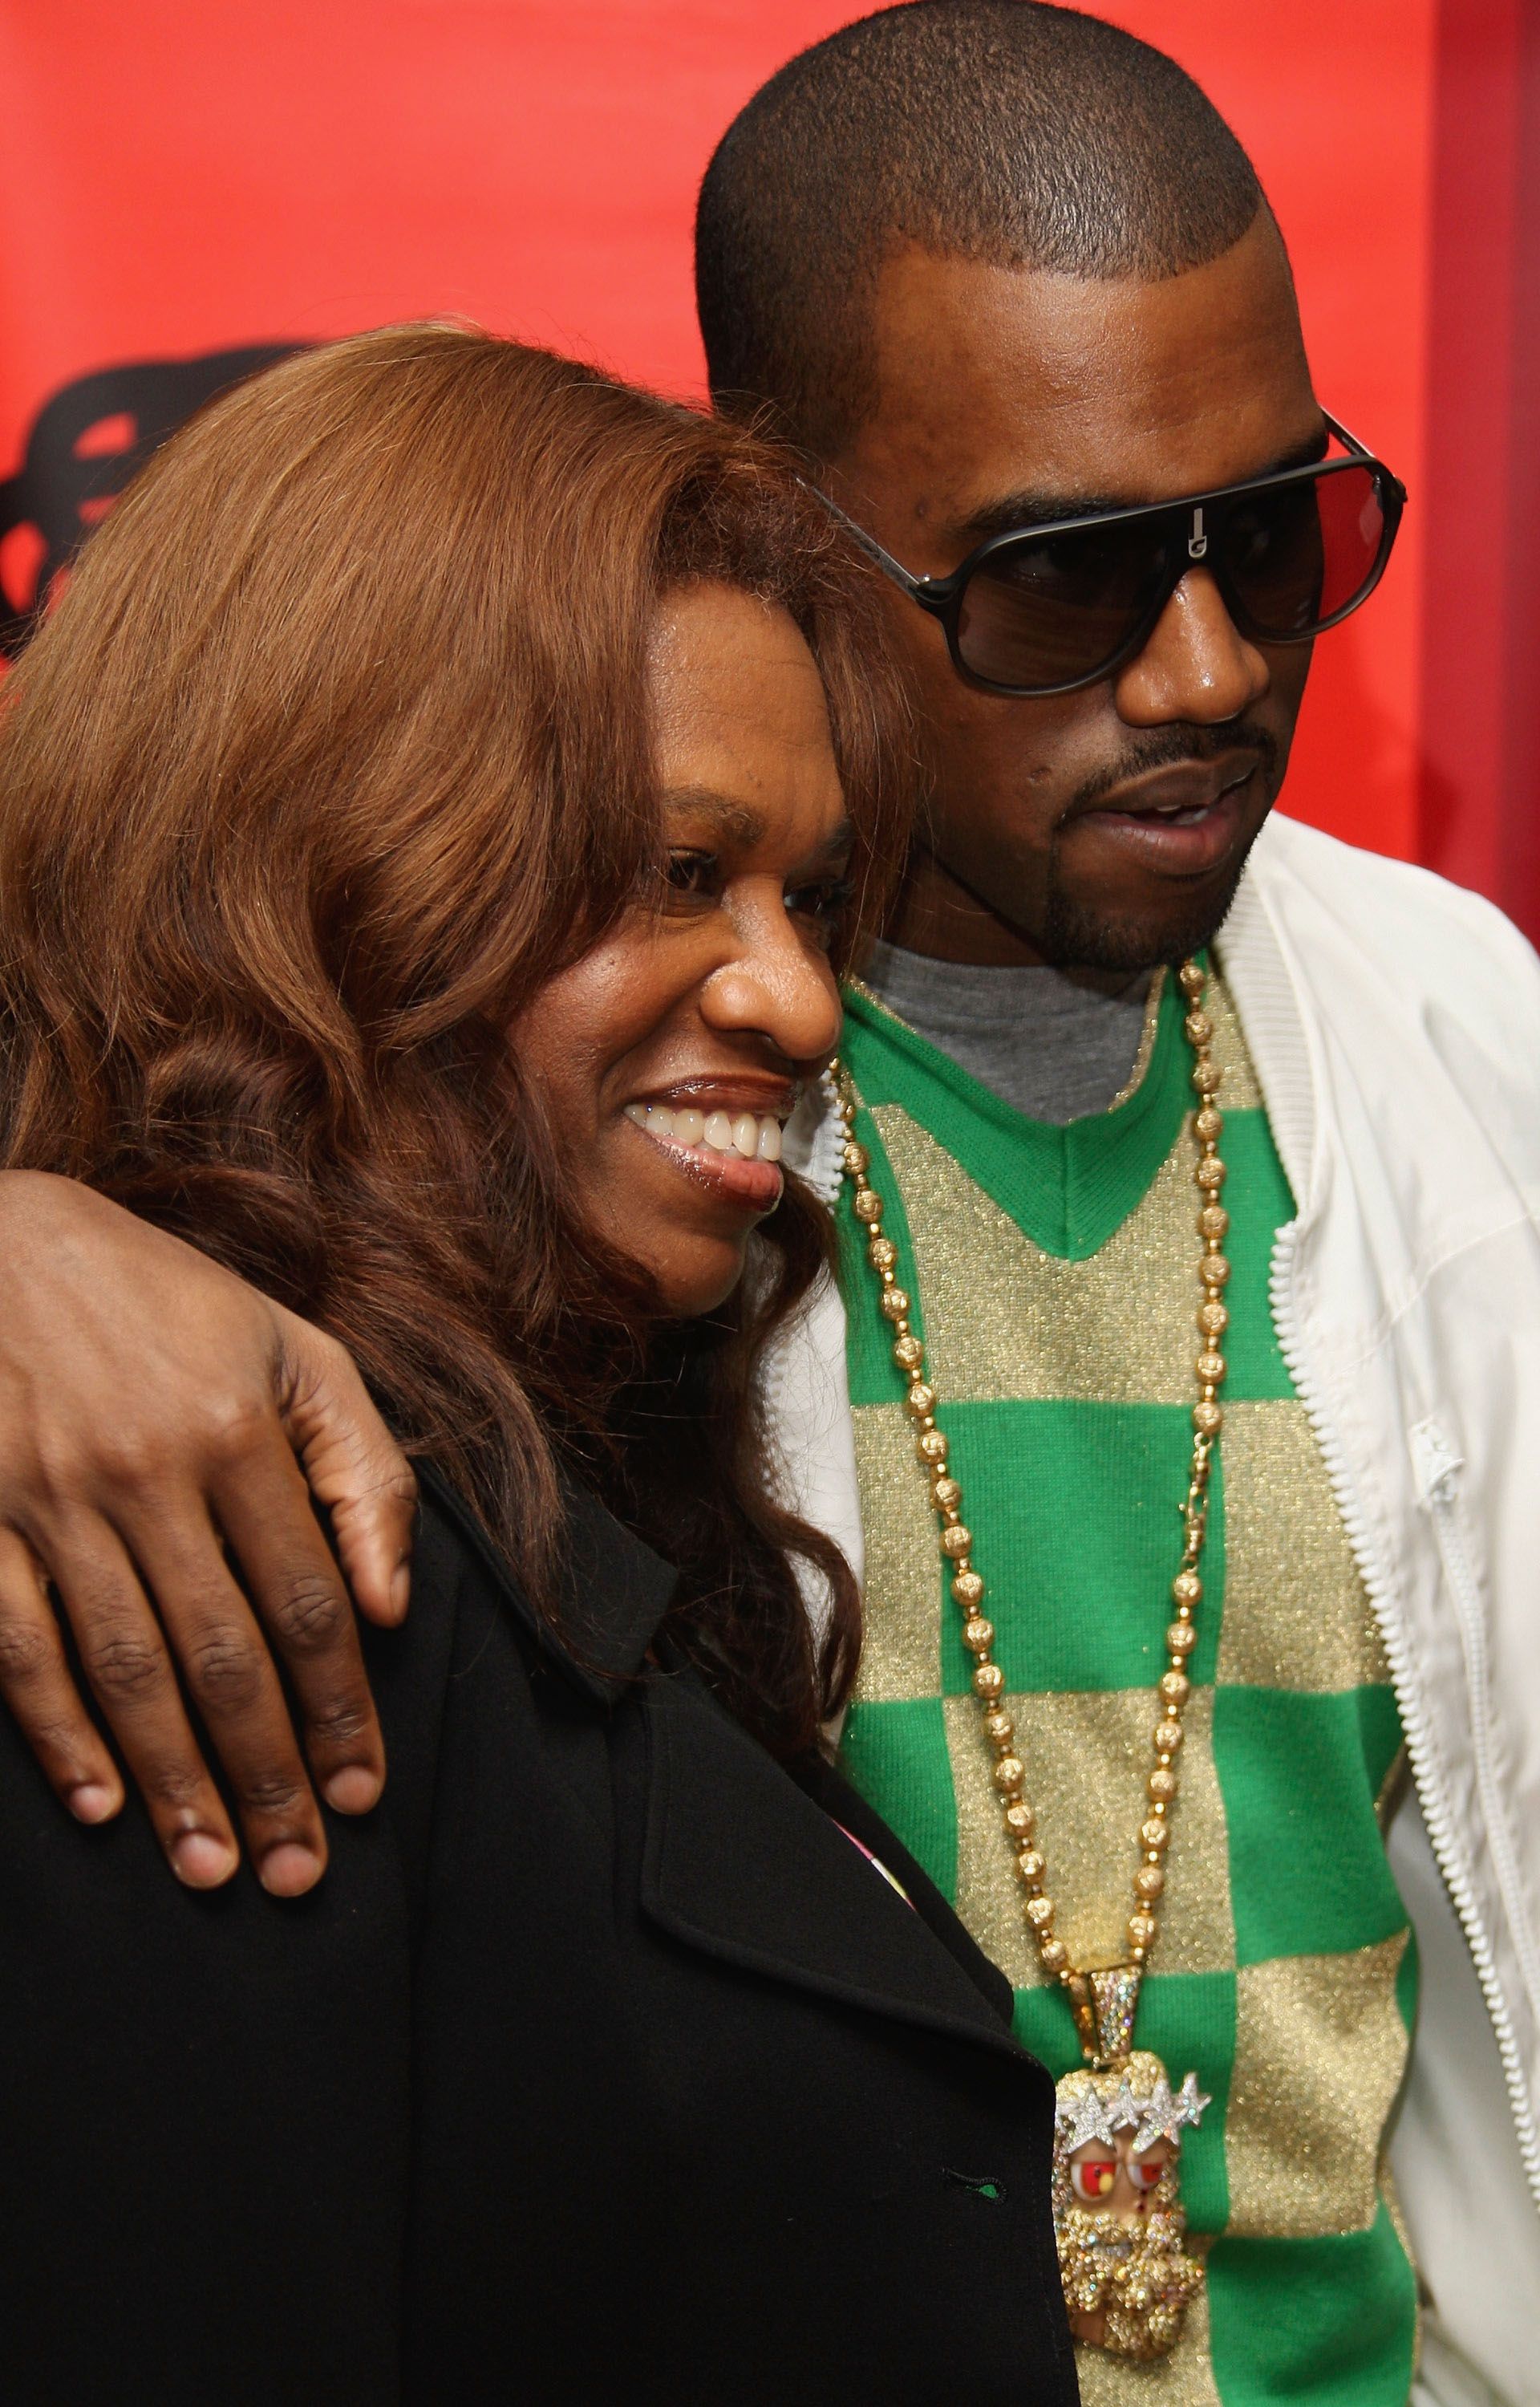 Kanye West with his mother Donda at a book signing for 'Raising Kanye: Life Lessons From The Mother Of A Hip-Hop Superstar' in June 2007 in London | Source: Getty Images